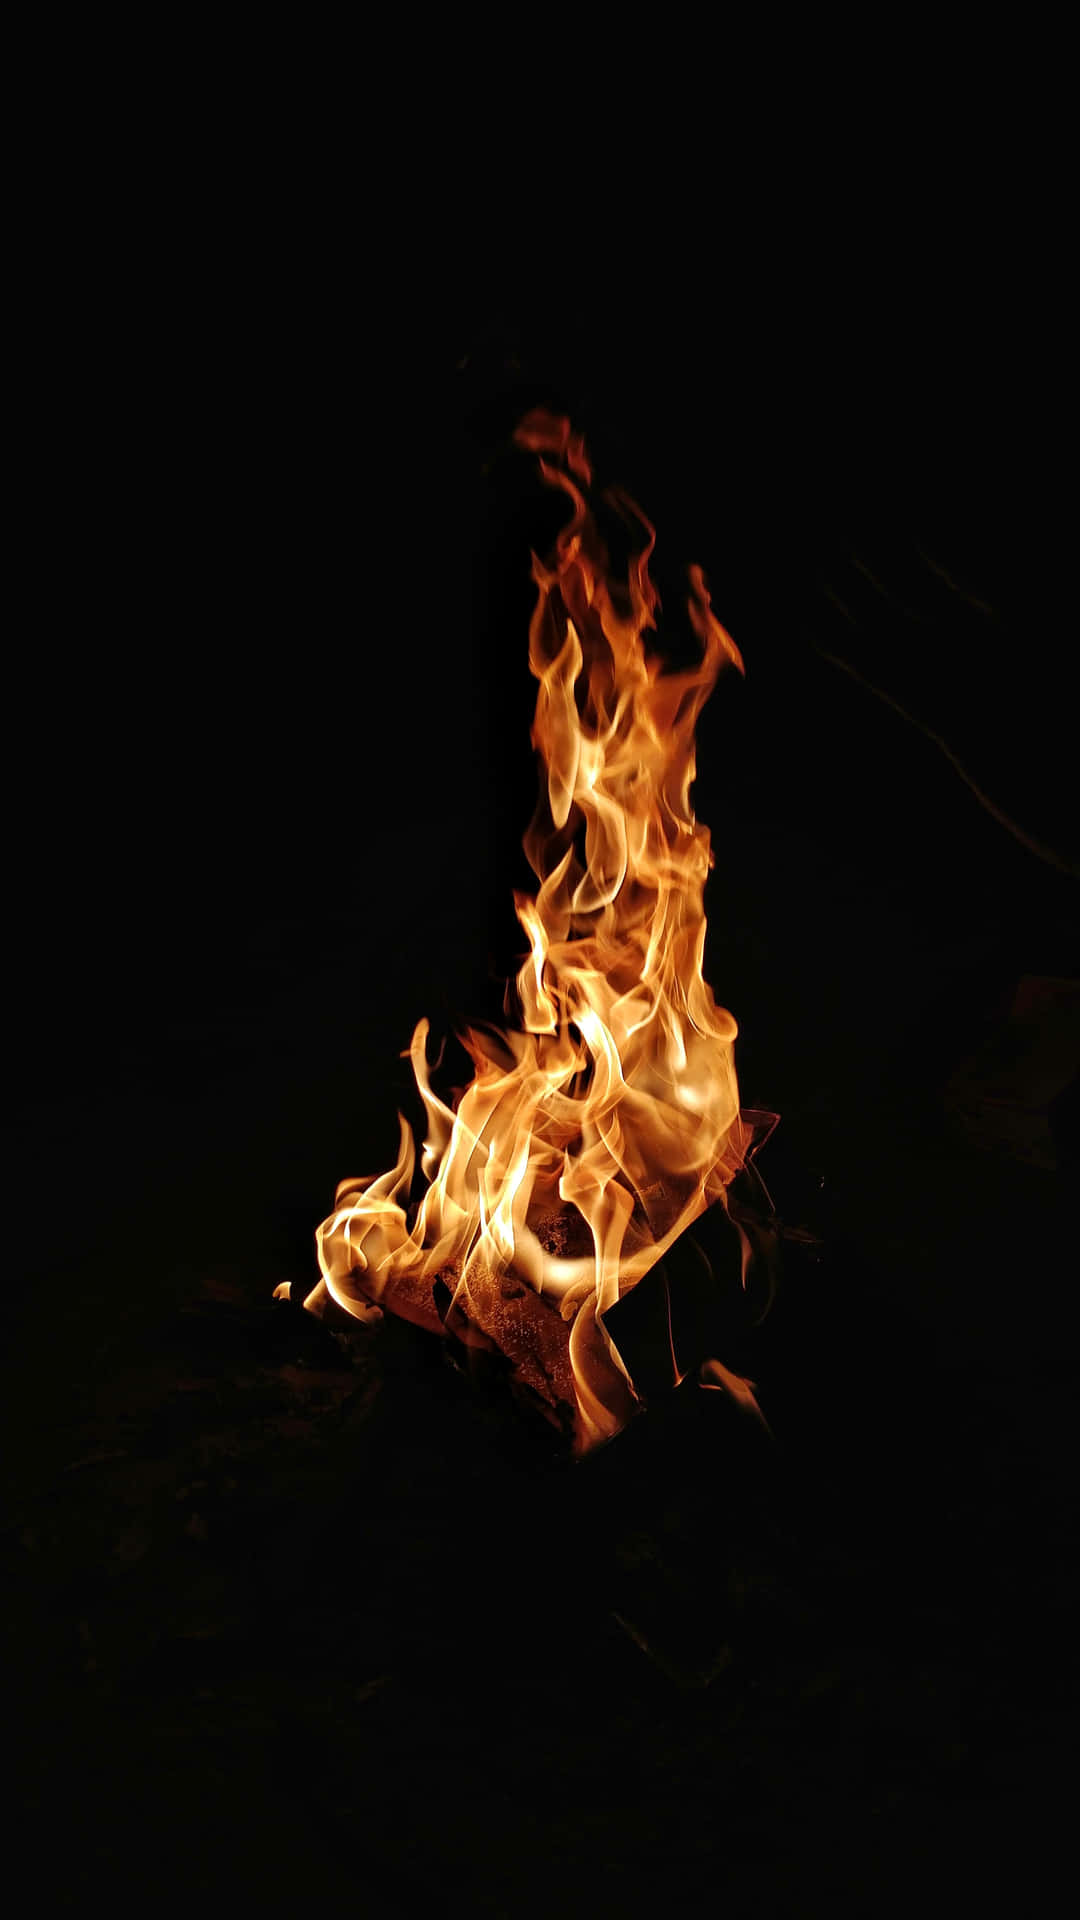 A Fire Burning In The Dark Wallpaper